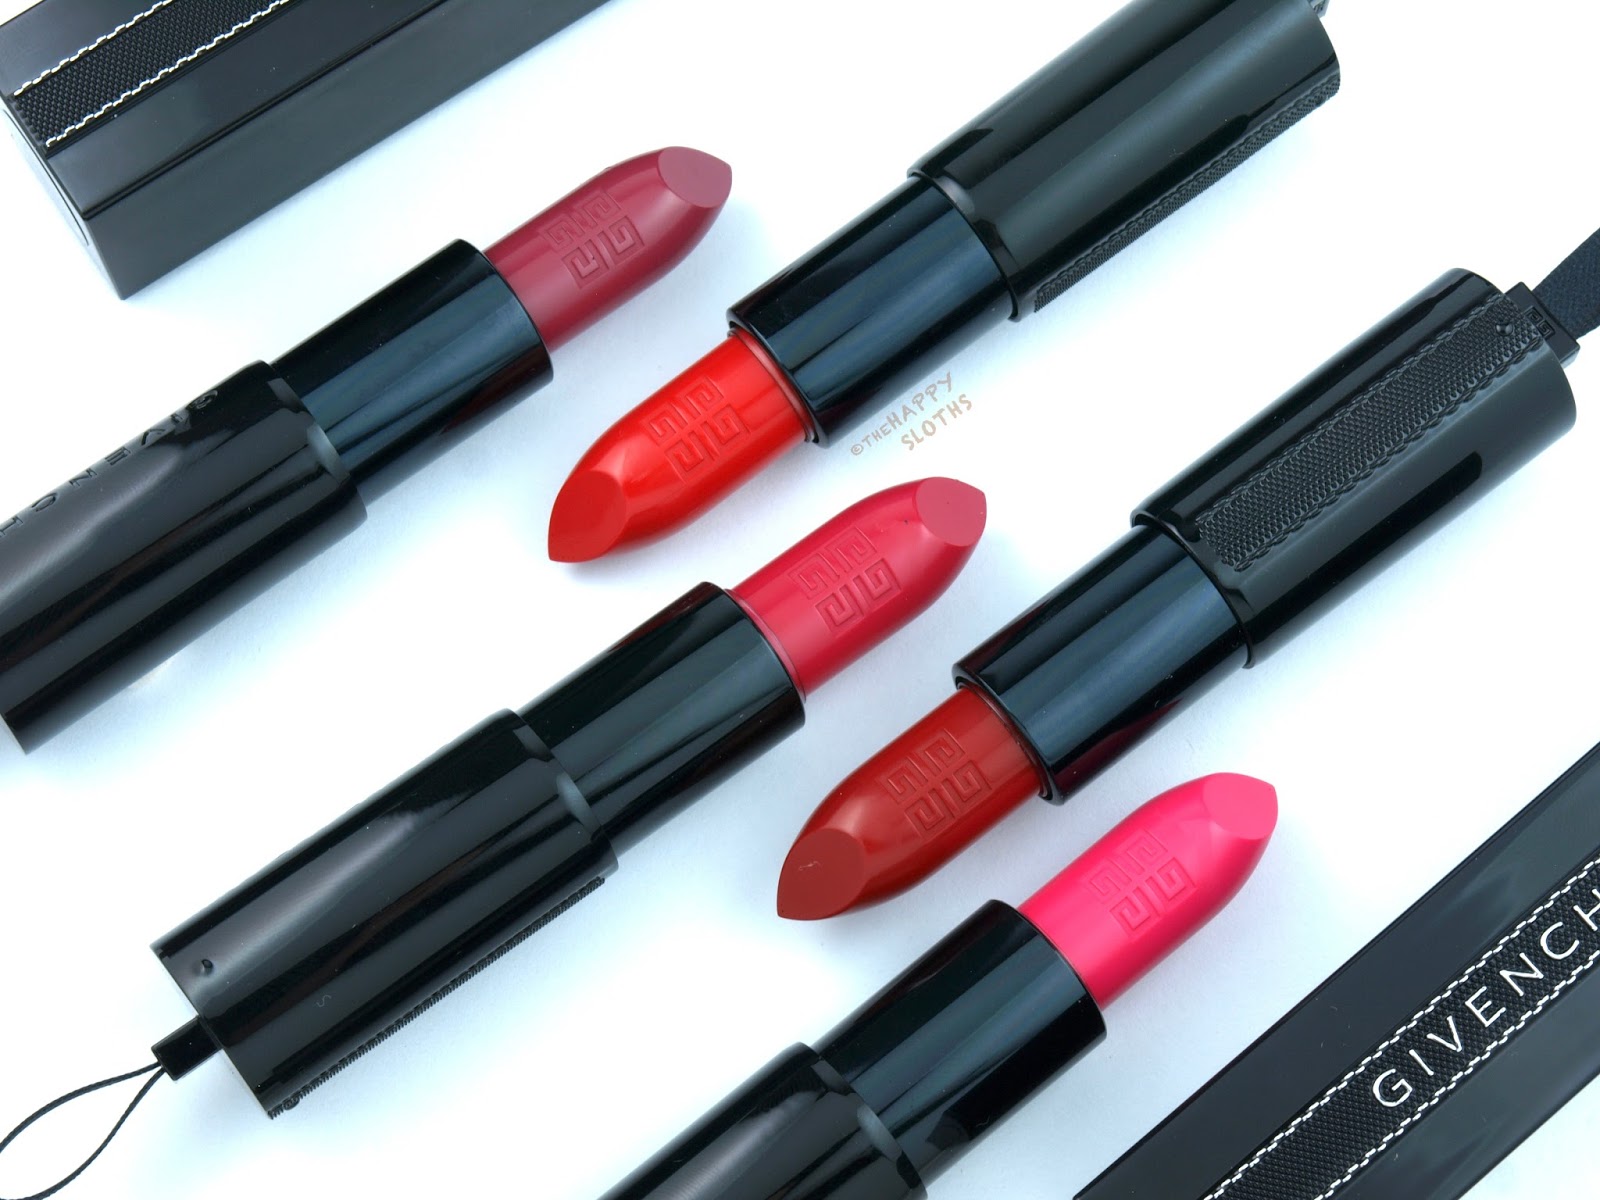 Givenchy Rouge Interdit Satin Lipsticks: Review and Swatches